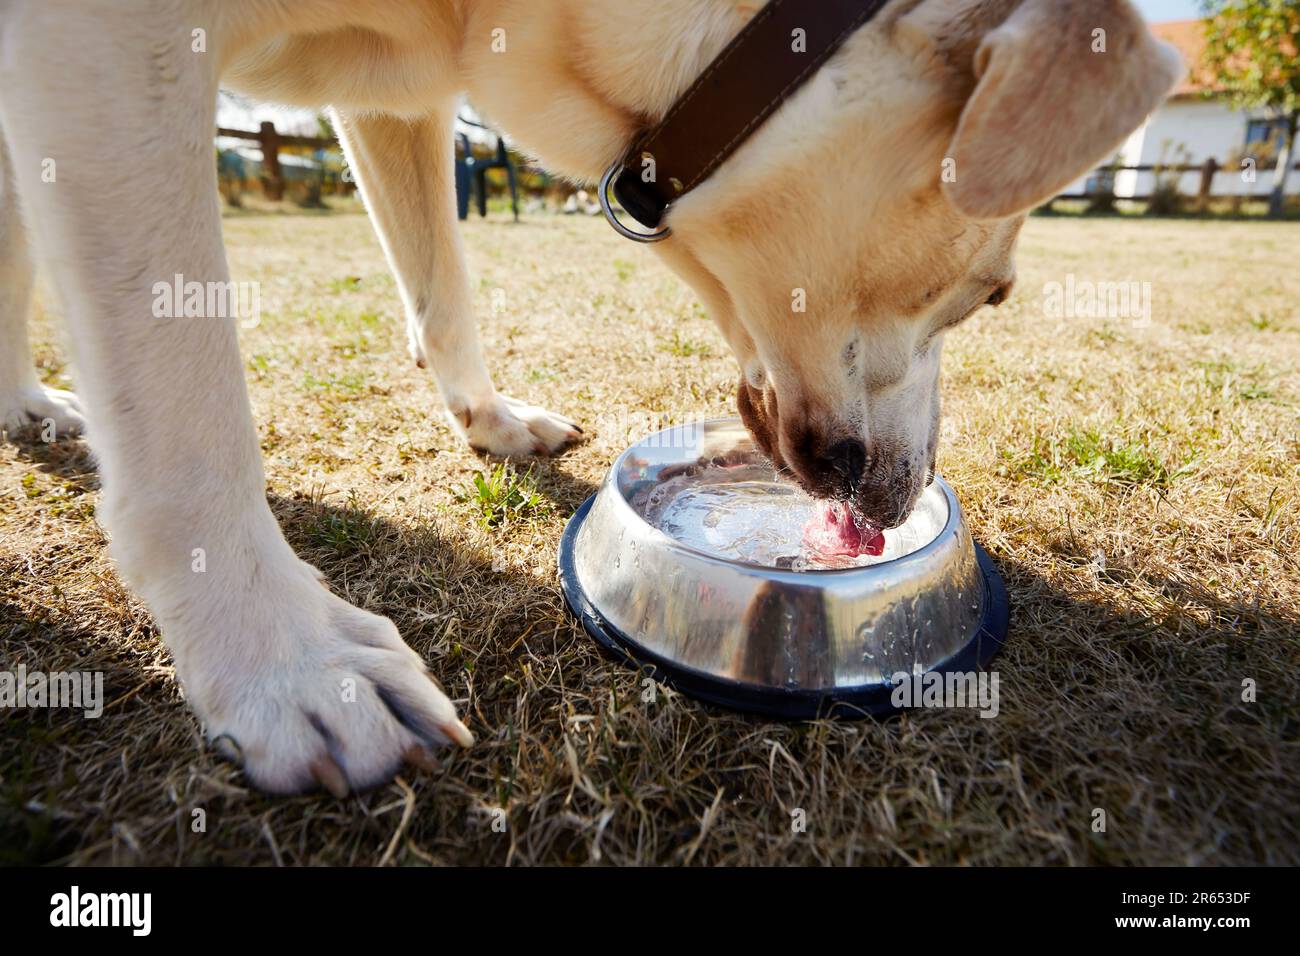 Thirsty dog during hot summer day. Selective focus on tongue of labrador retriever while drinking water from metal bowl. Stock Photo